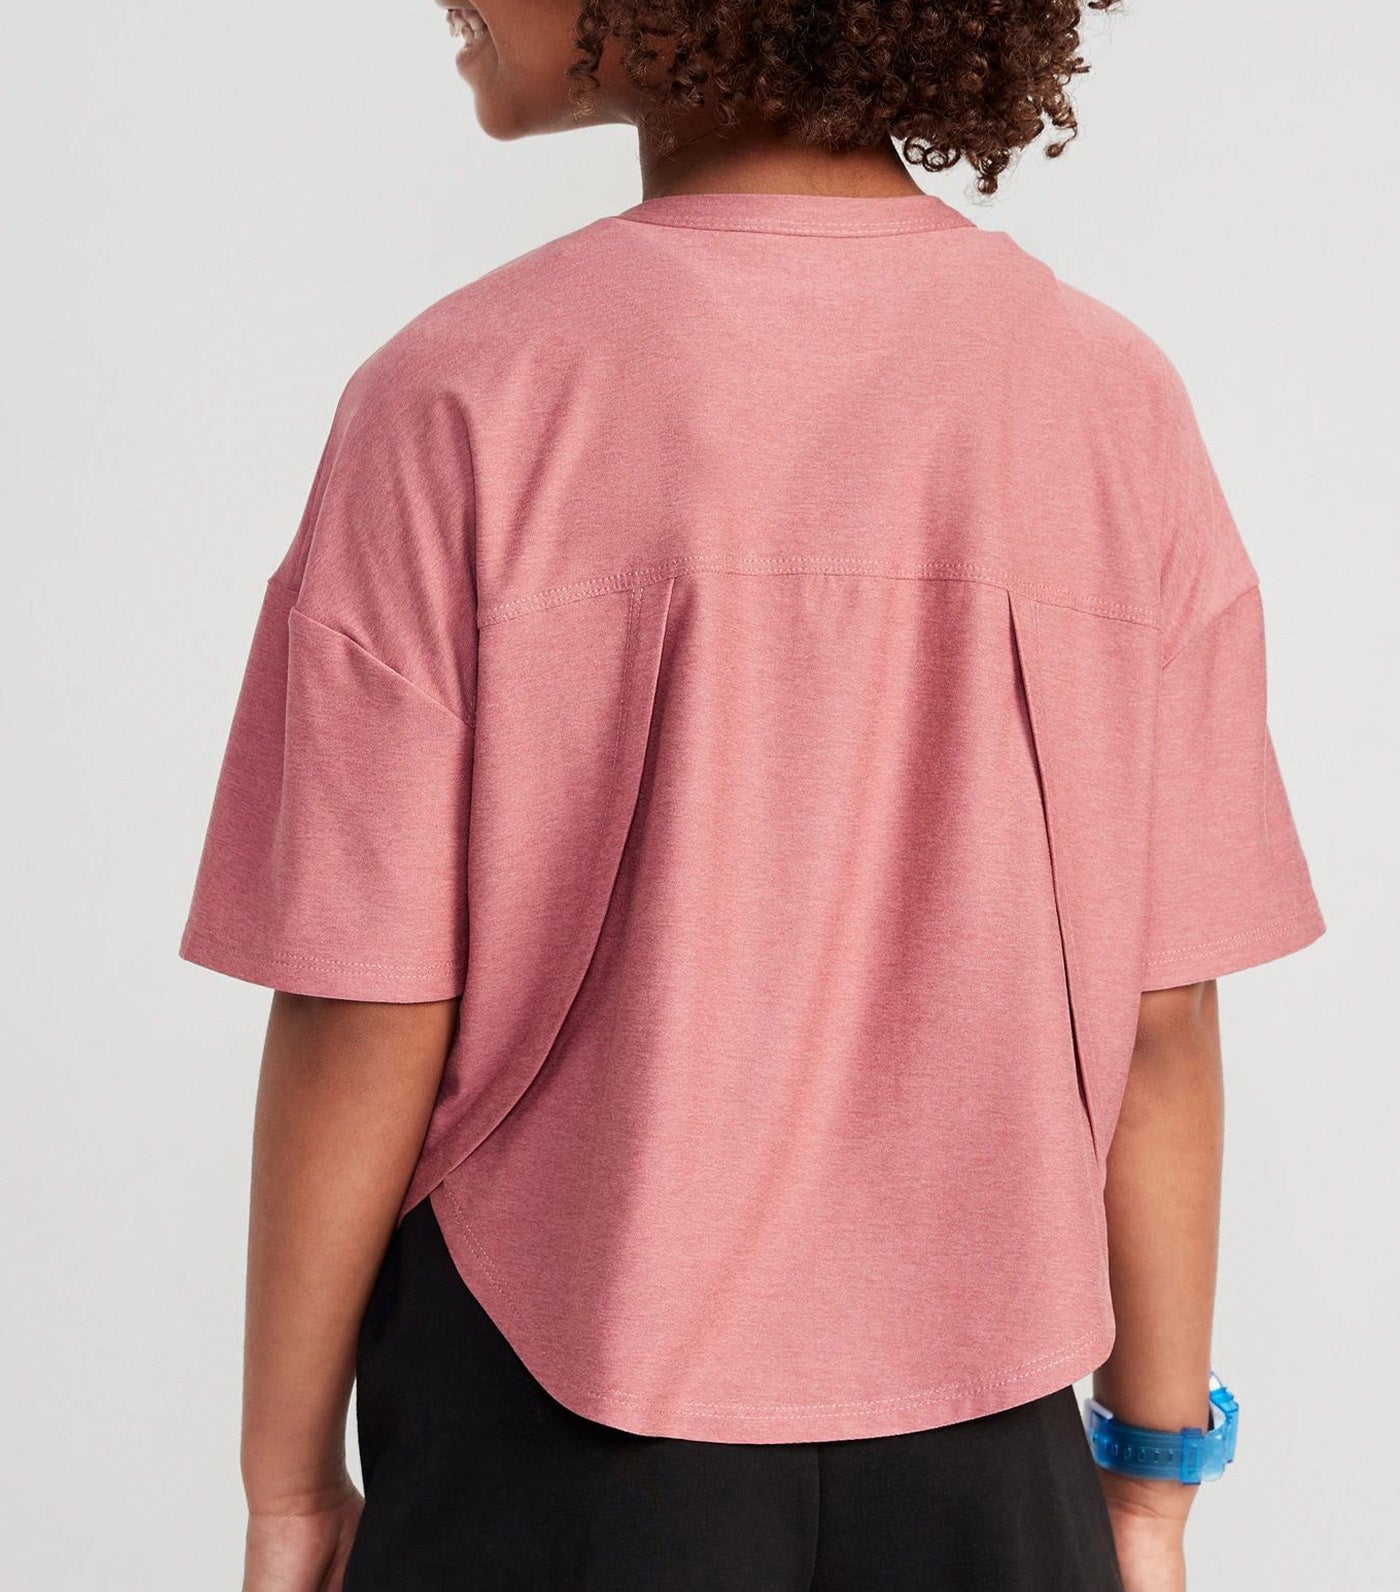 Cloud 94 Soft Go-Dry Cool Cropped T-Shirt for Girls - Rosebloom